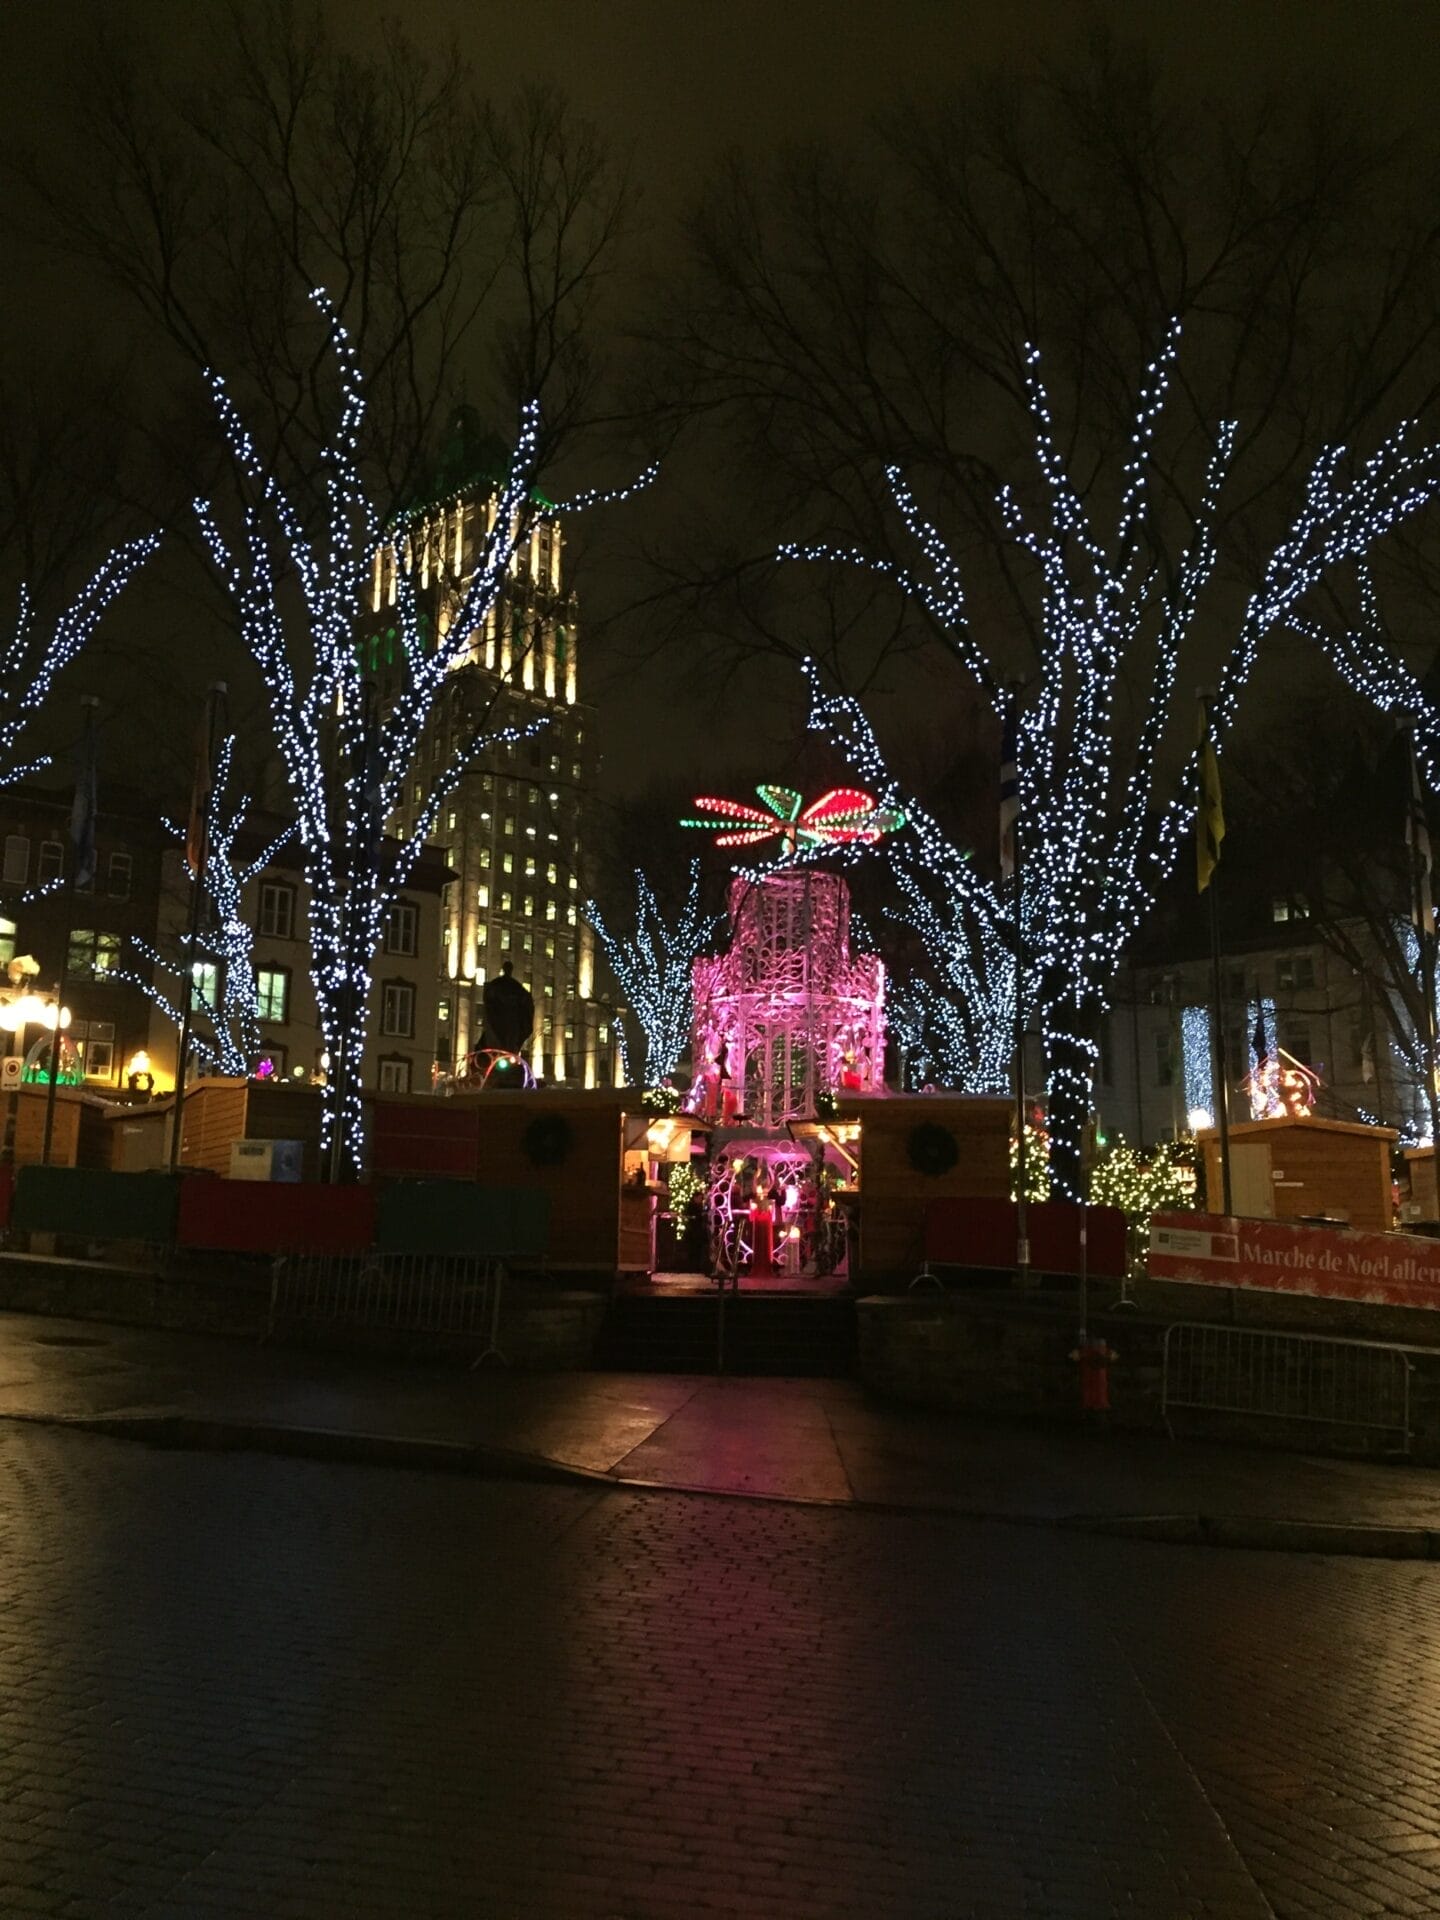 Quebec City: The entrance to the Christmas Market